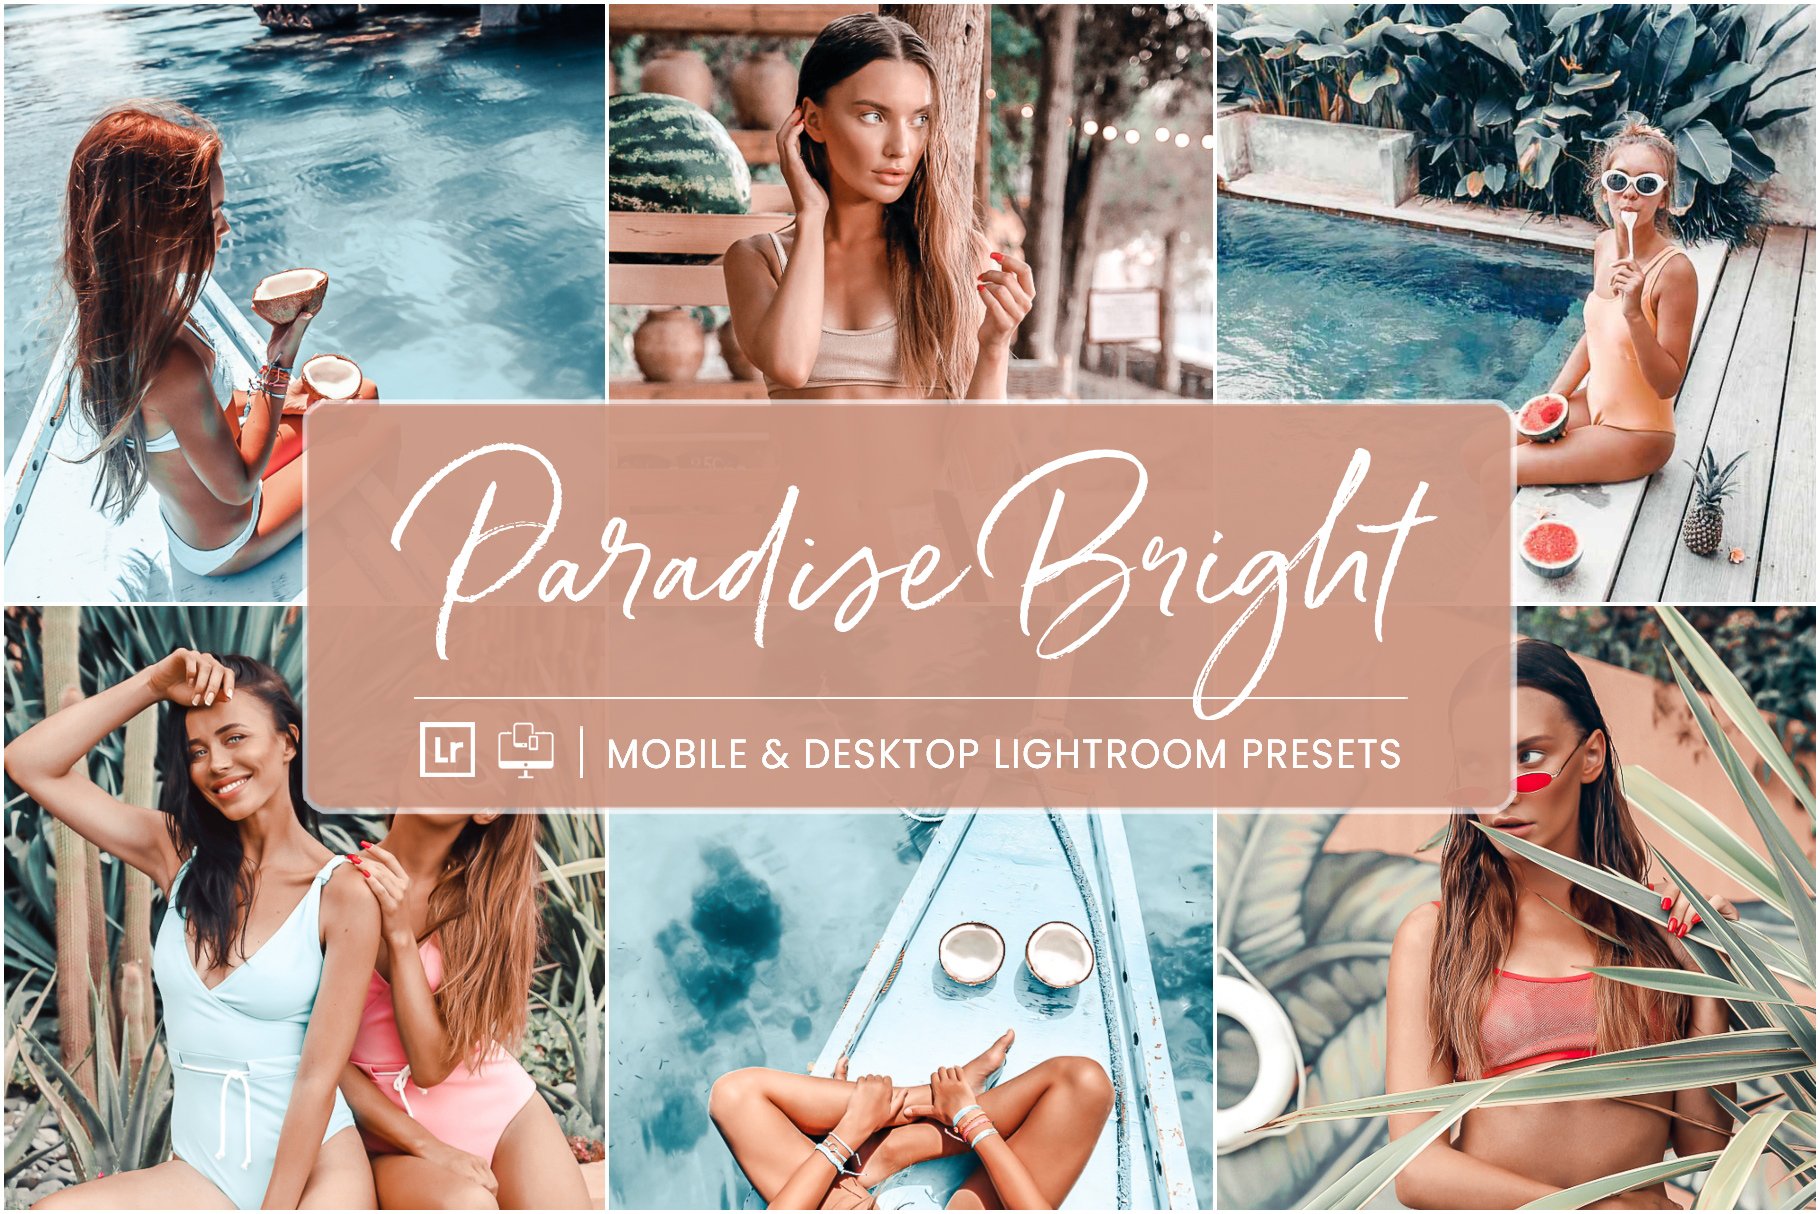 PARADISE BRIGHT LIGHTROOM PRESETScover image.